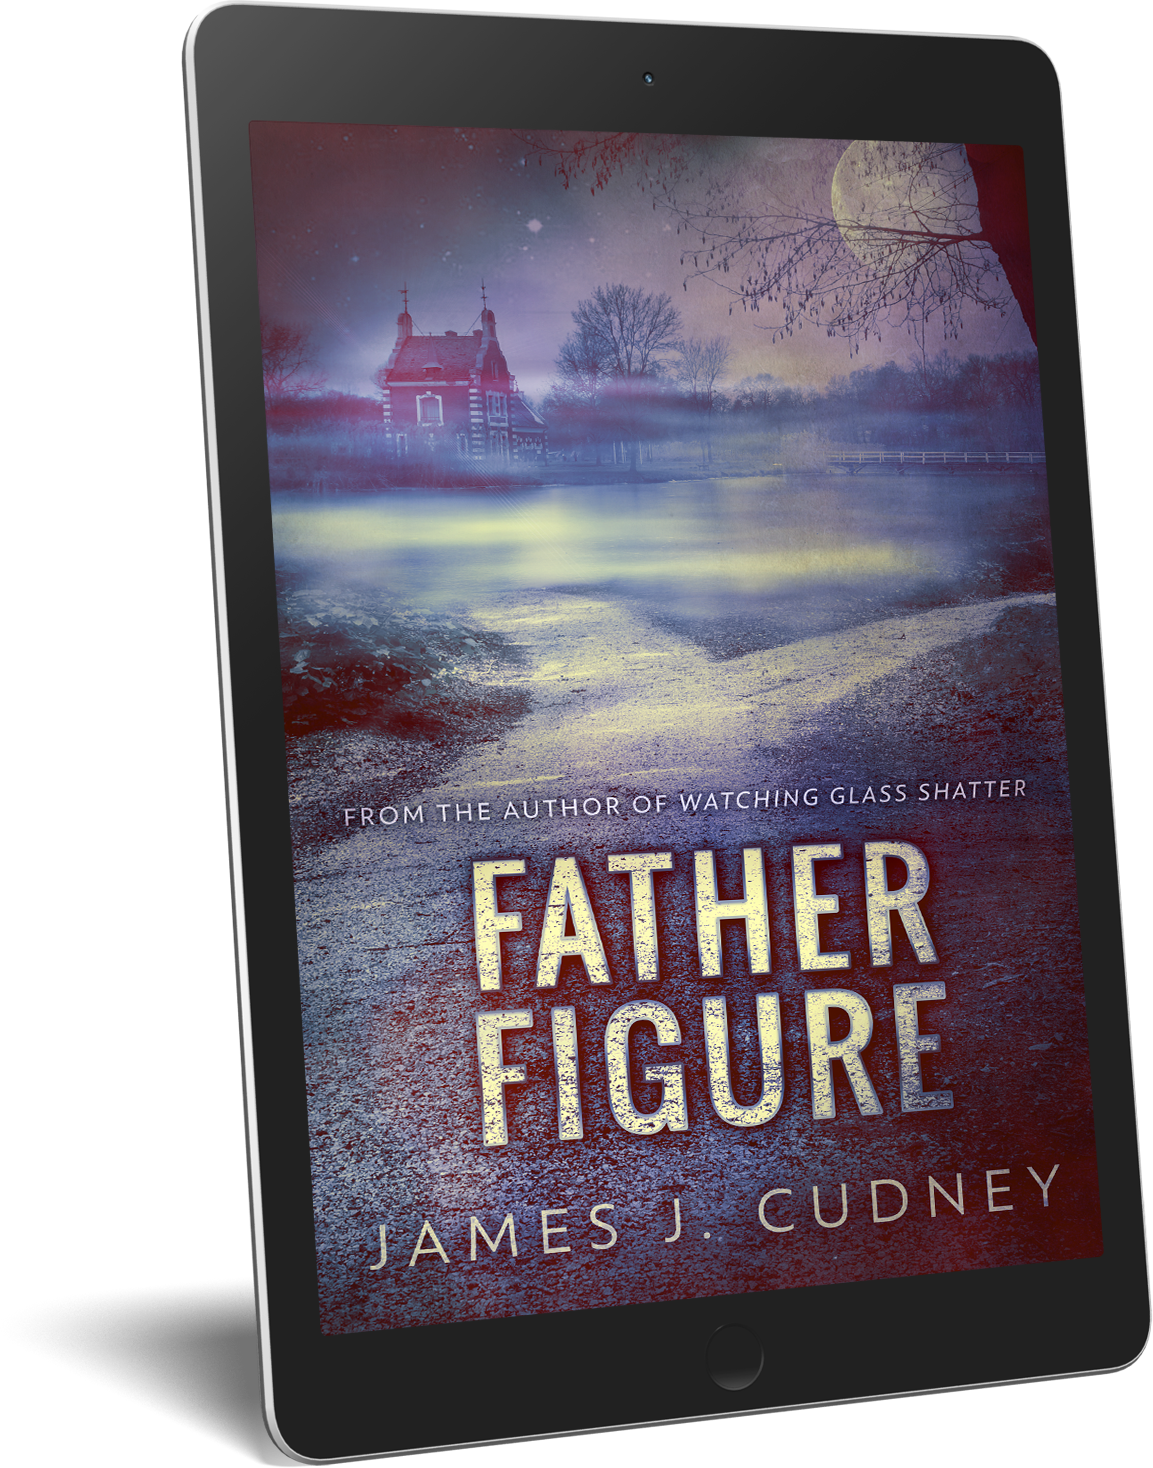 FREE: Father Figure by James J. Cudney